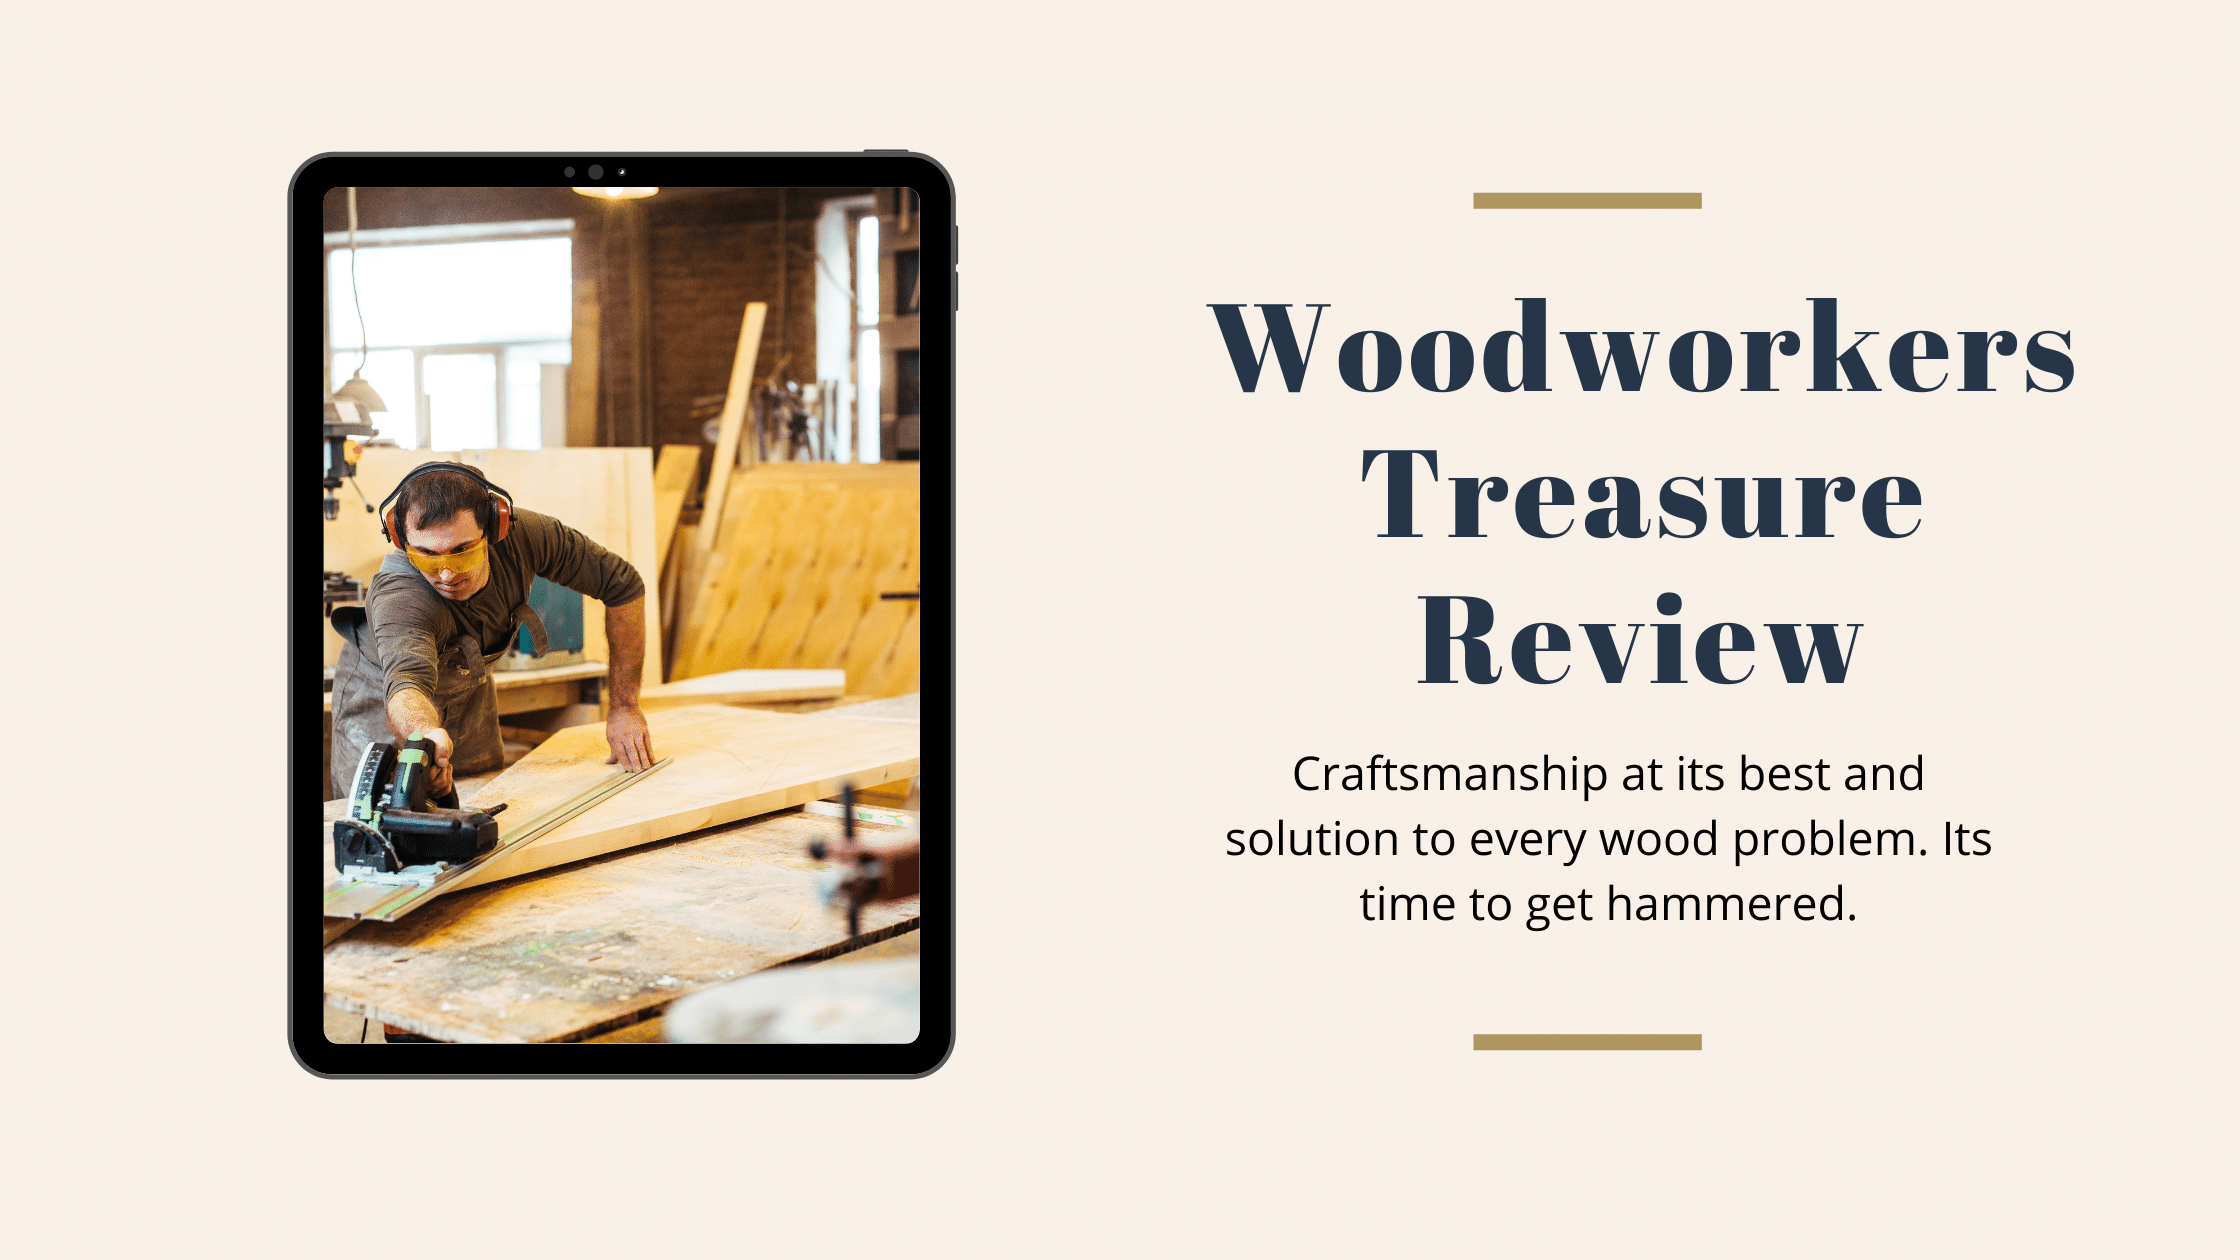 Woodworkers Treasure Review